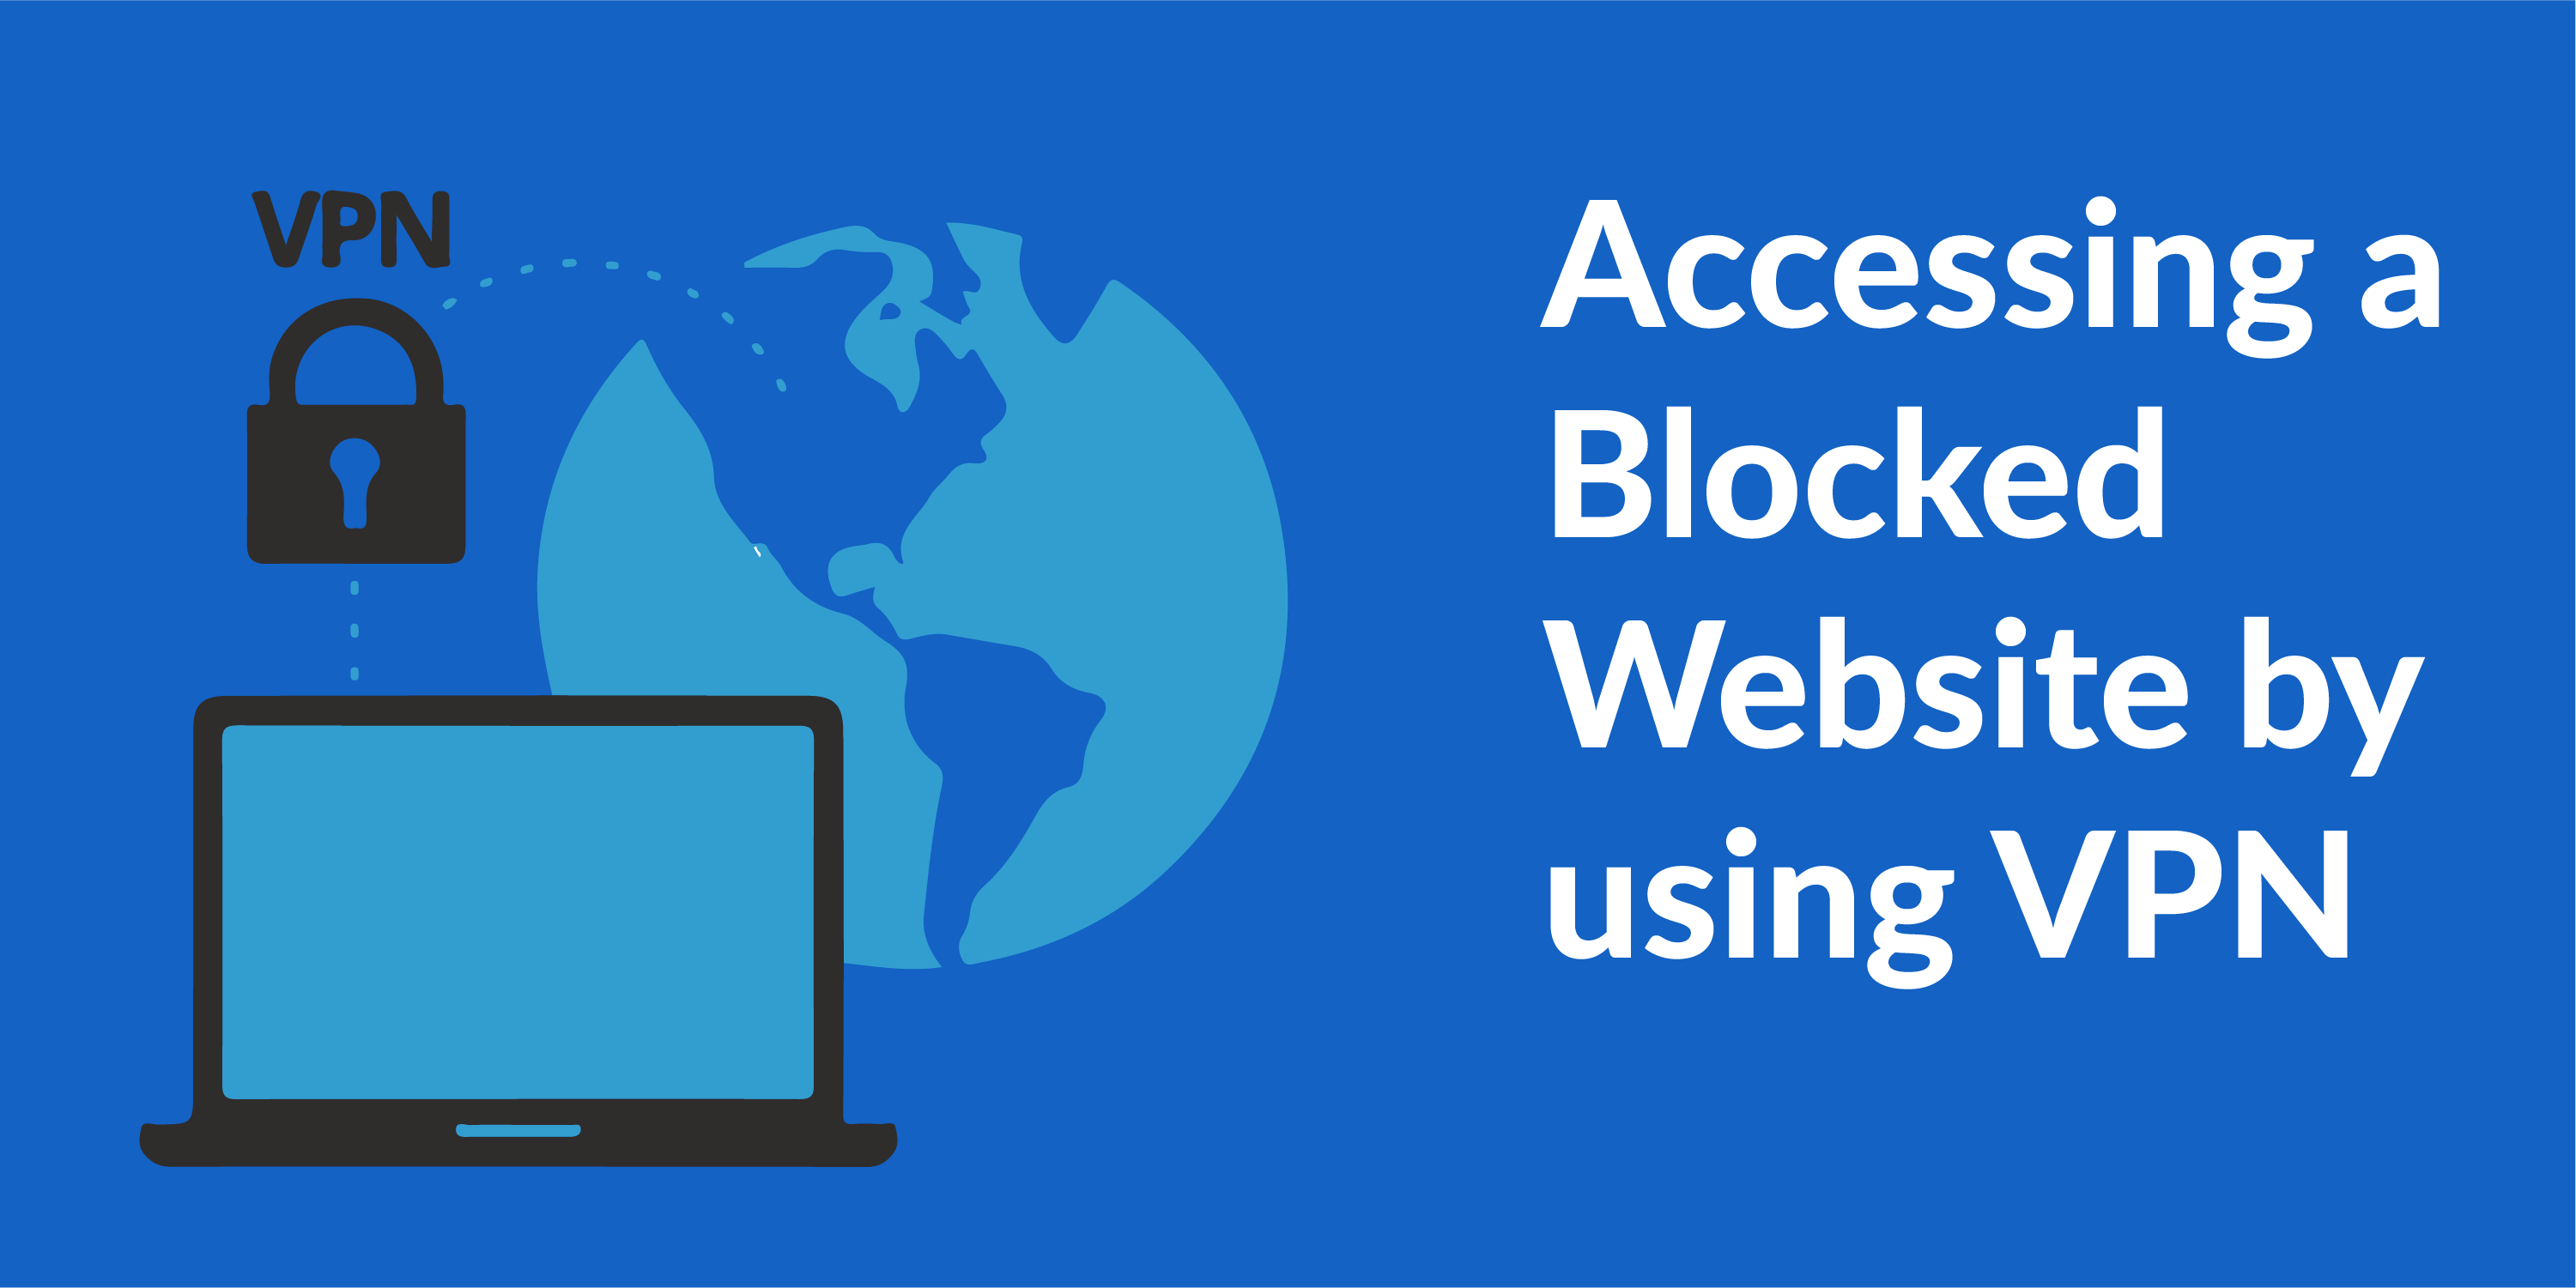 Access the Blocked Websites by Using VPN